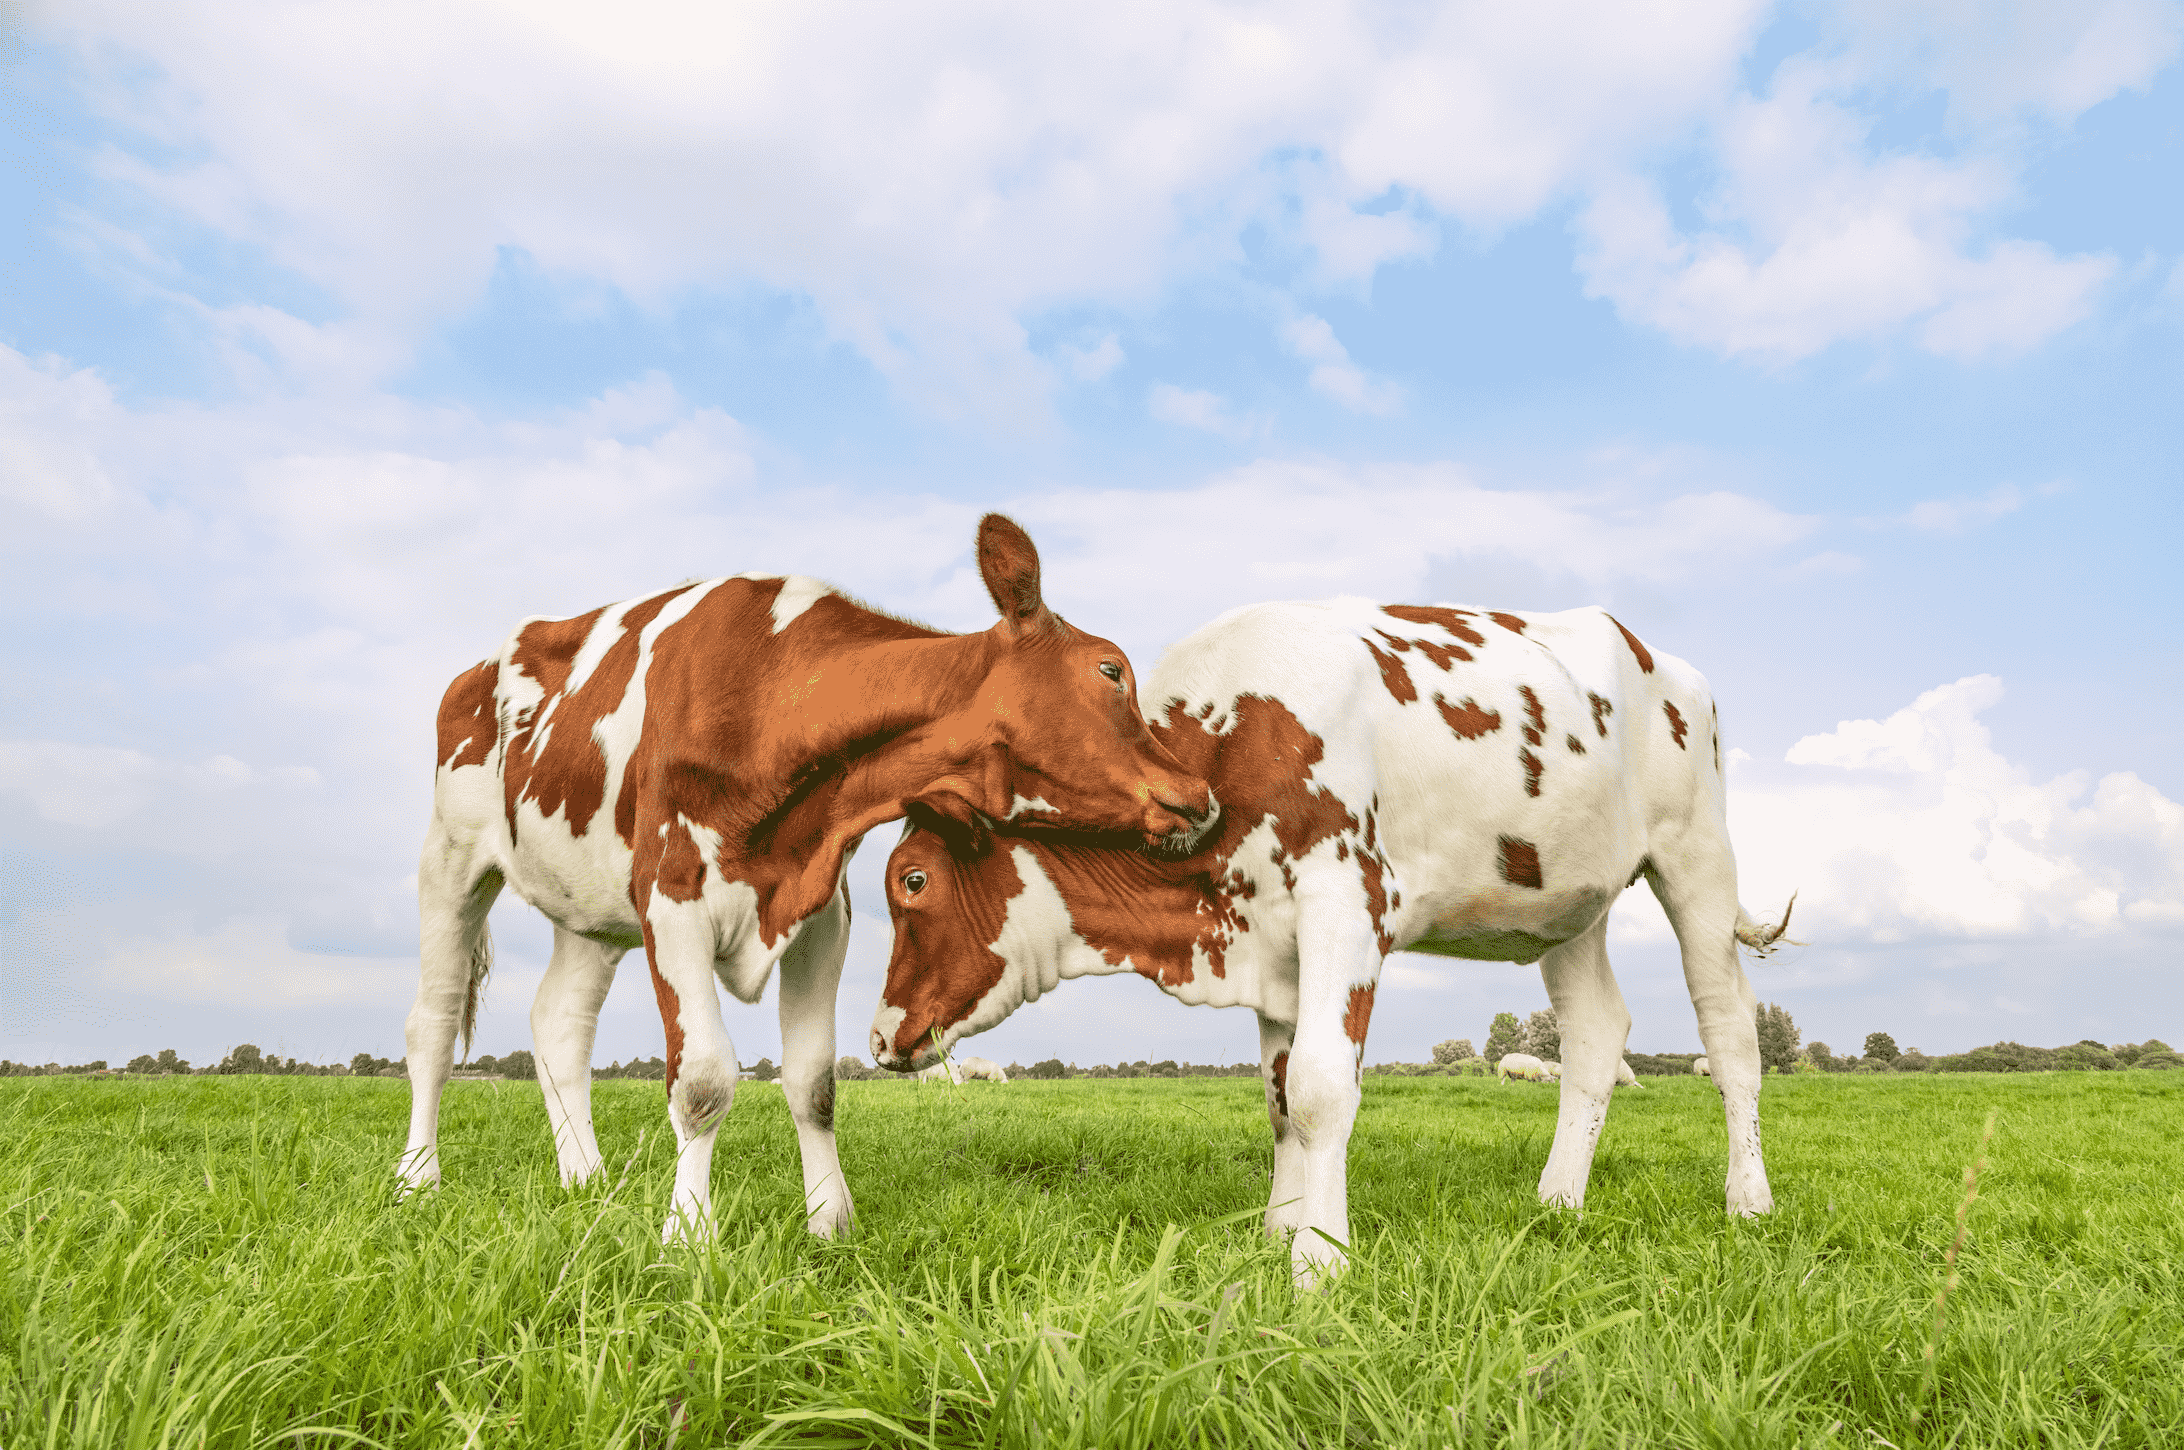 Two cows cuddling outside on the grass.